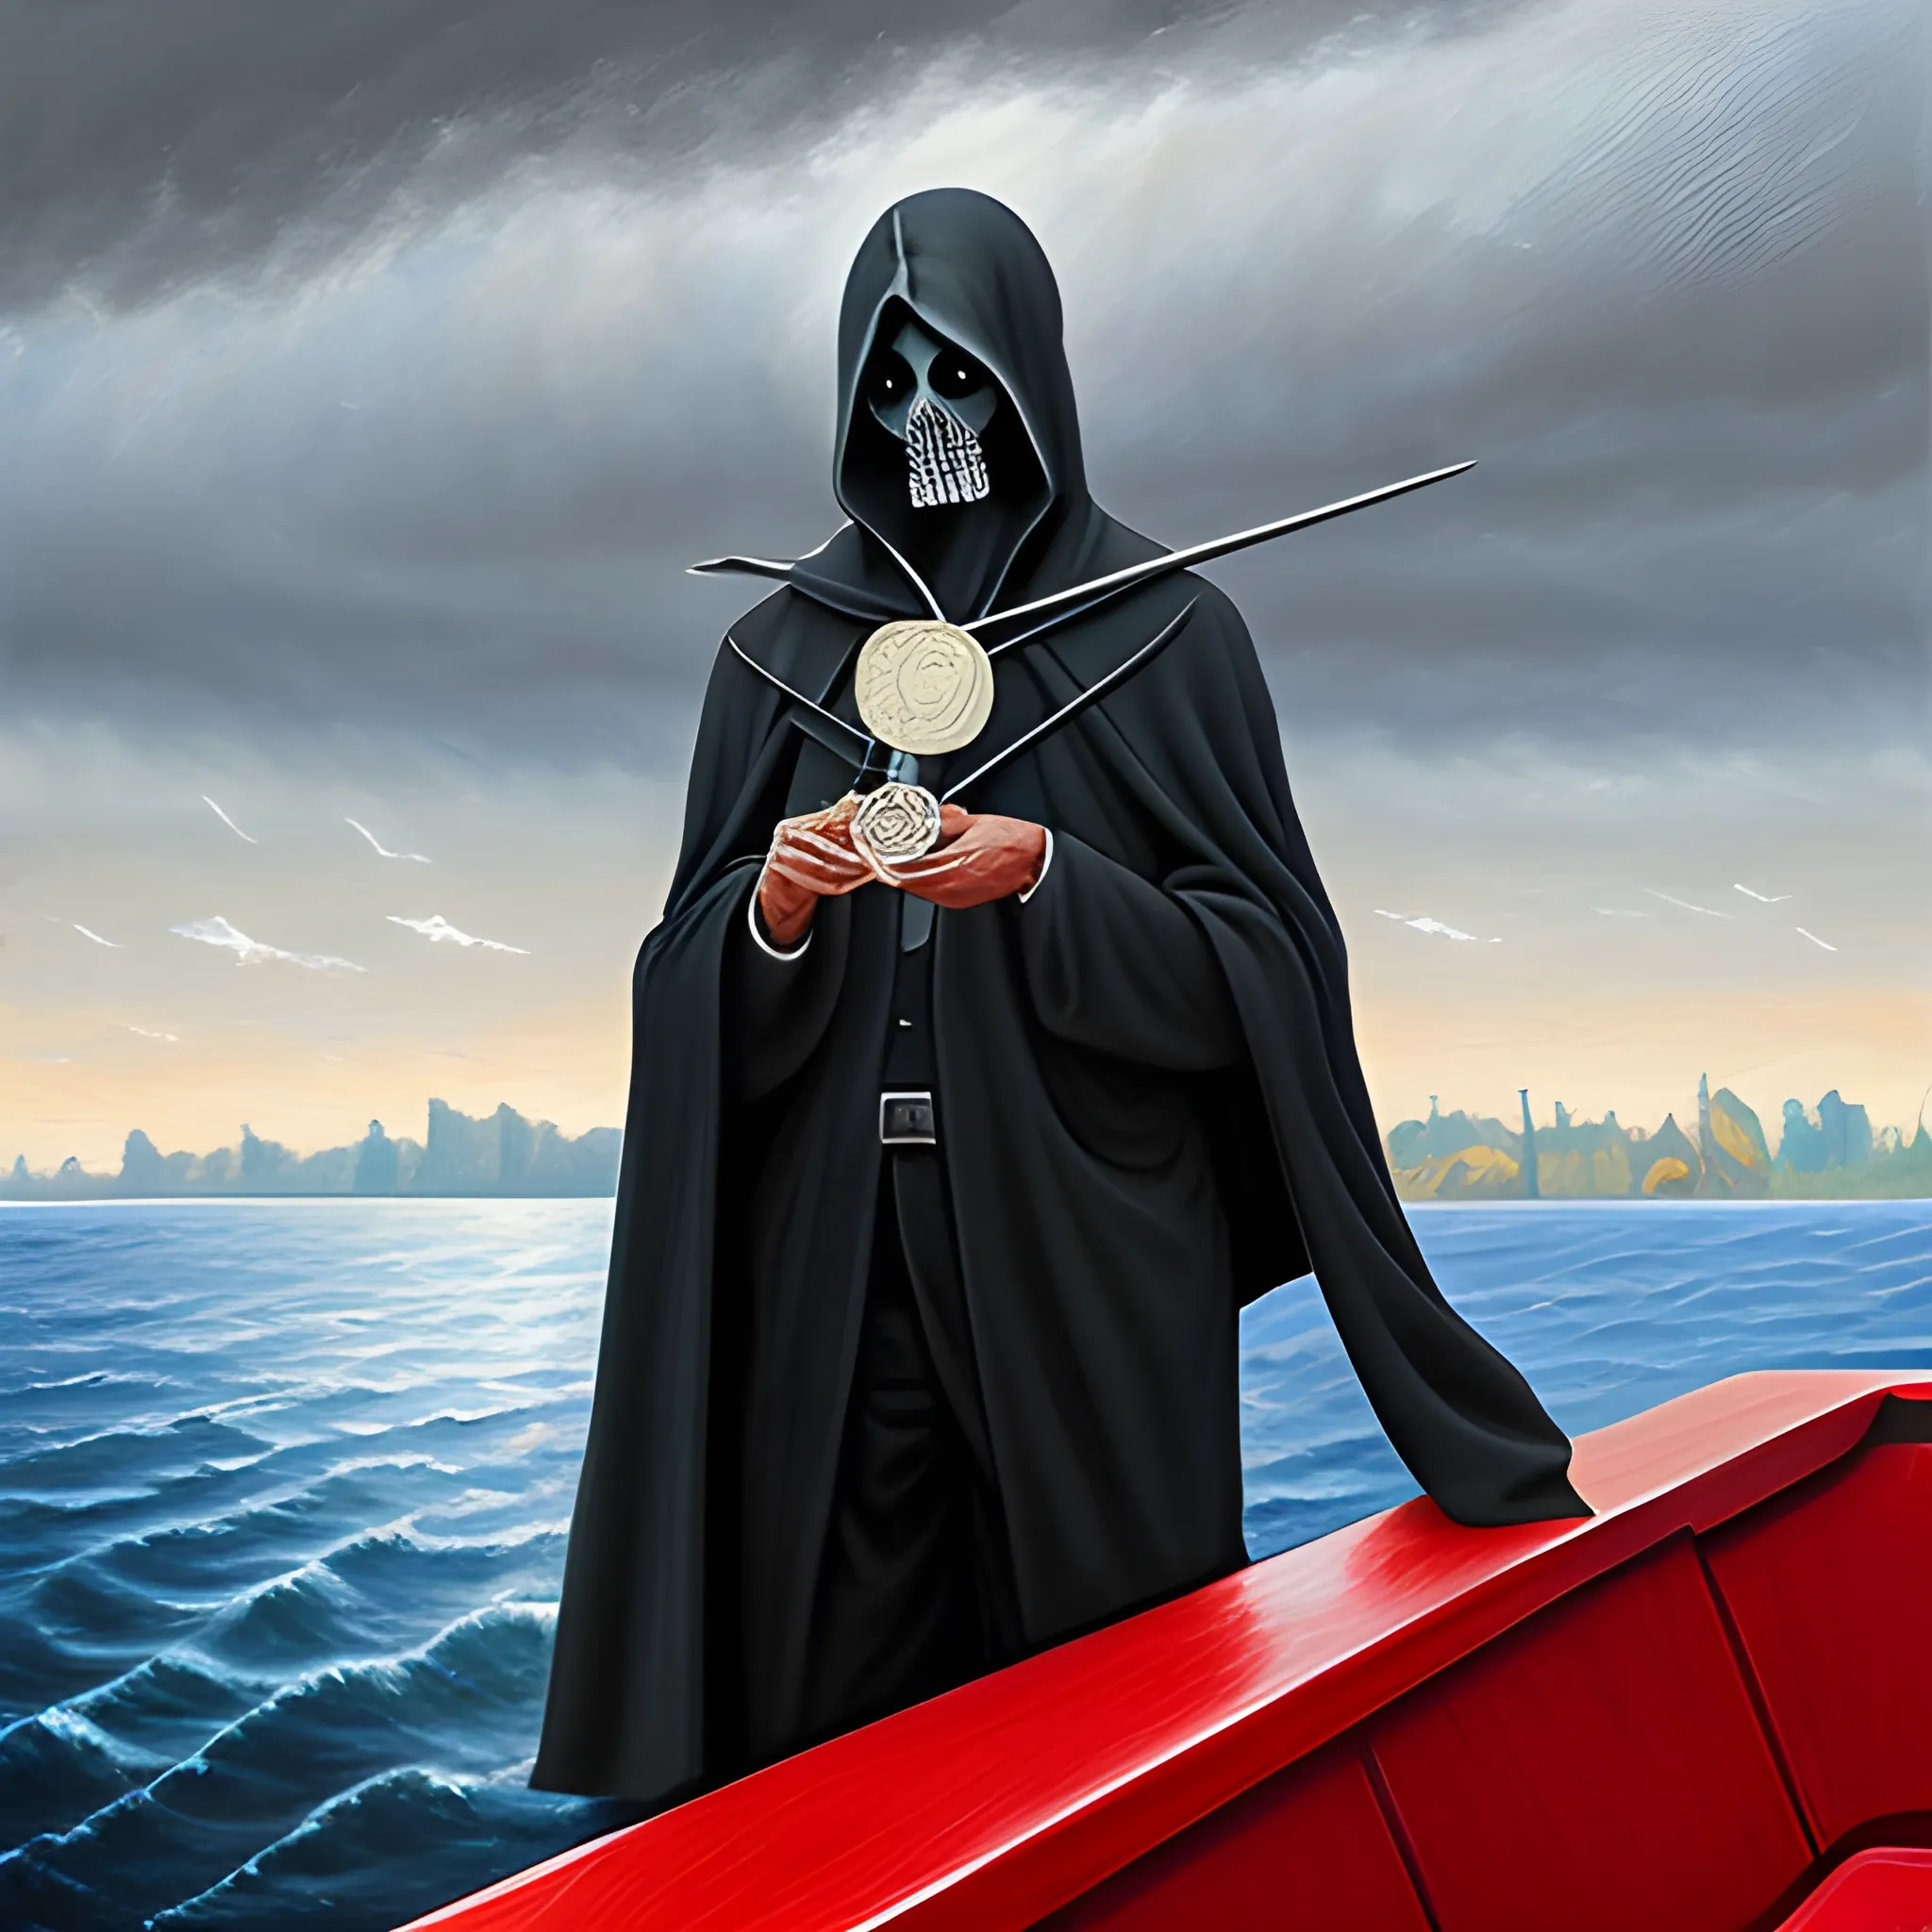 Grim reaper on his ferry holding coin, Oil Painting